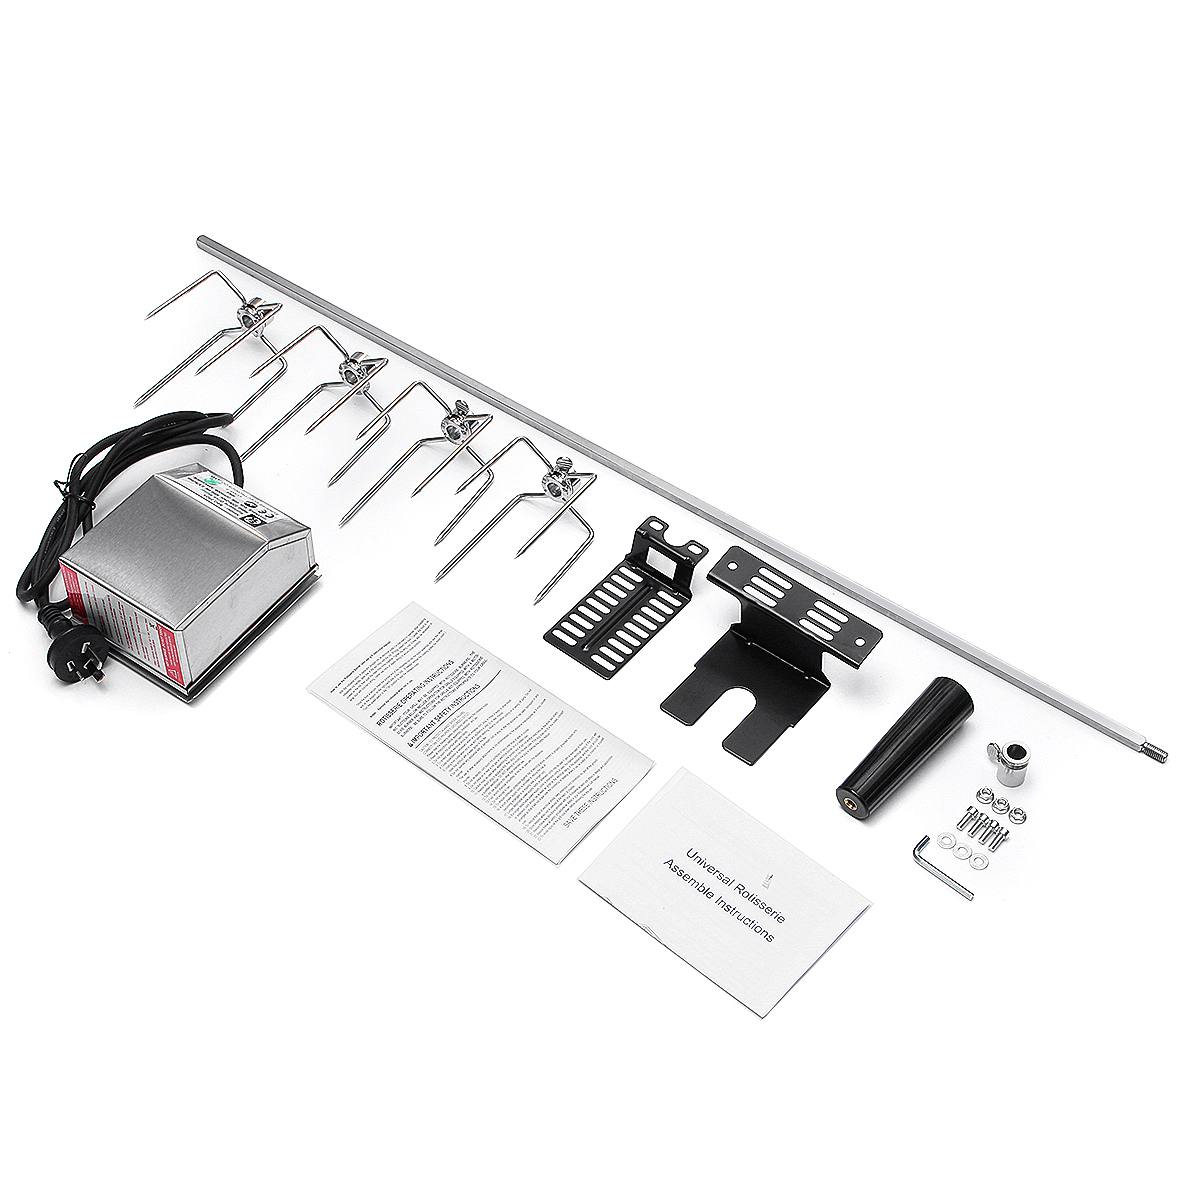 Automatic BBQ Grill Rotisserie Parts Electric BBQ Motor Spit Roaster Rod Meat Fork Outdoor Camping Cooking Tools 220-240V 82cm